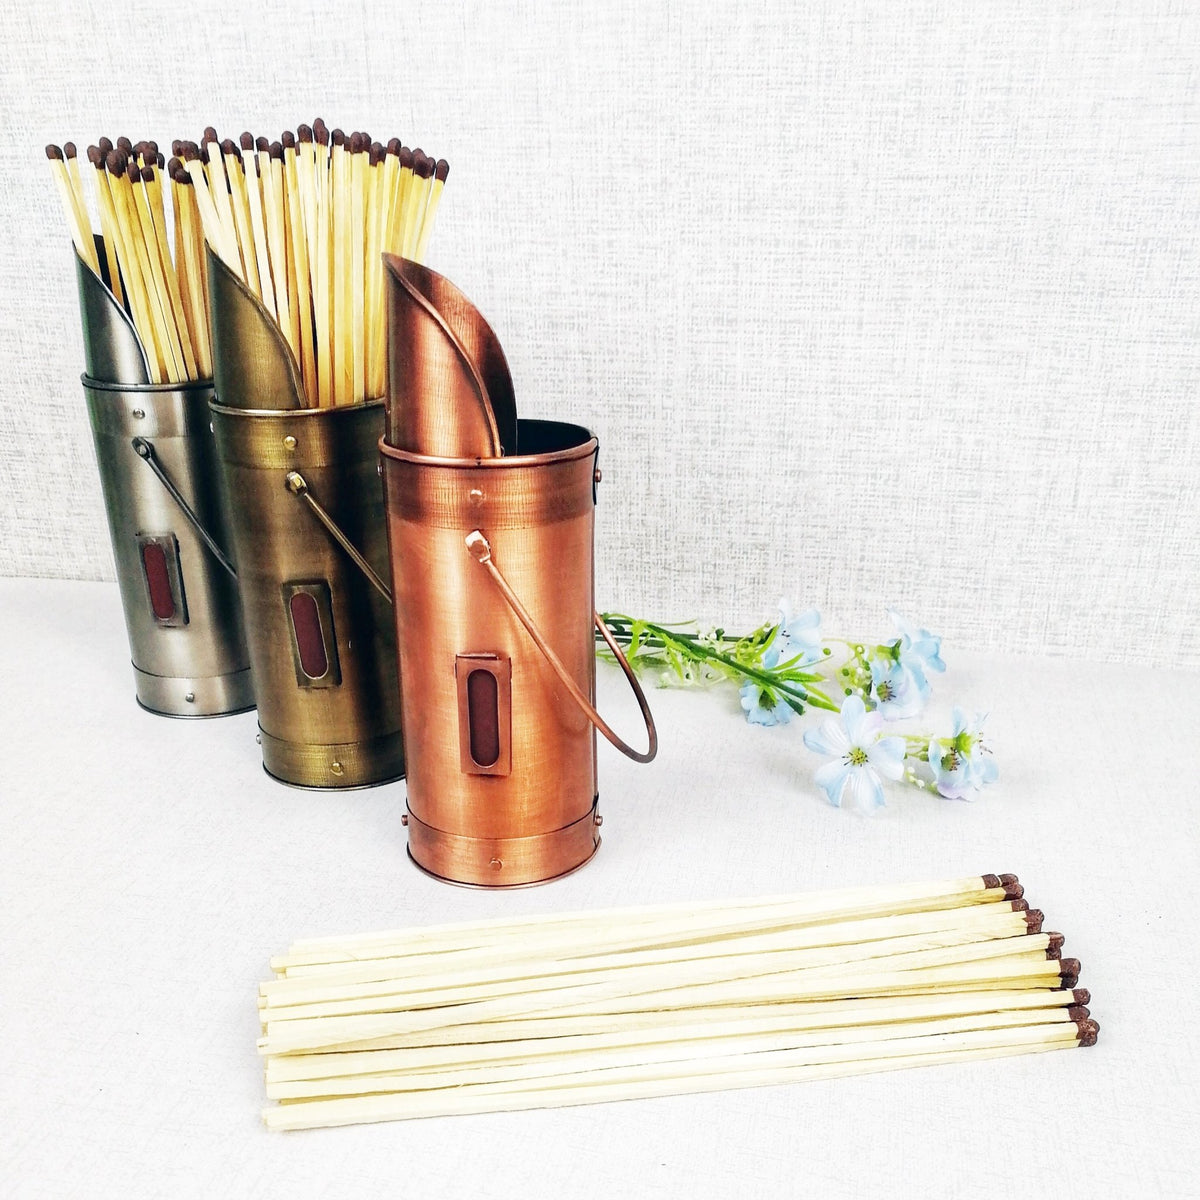 Matchstick holders bronze pewter copper with matches and flowers blue against grey background